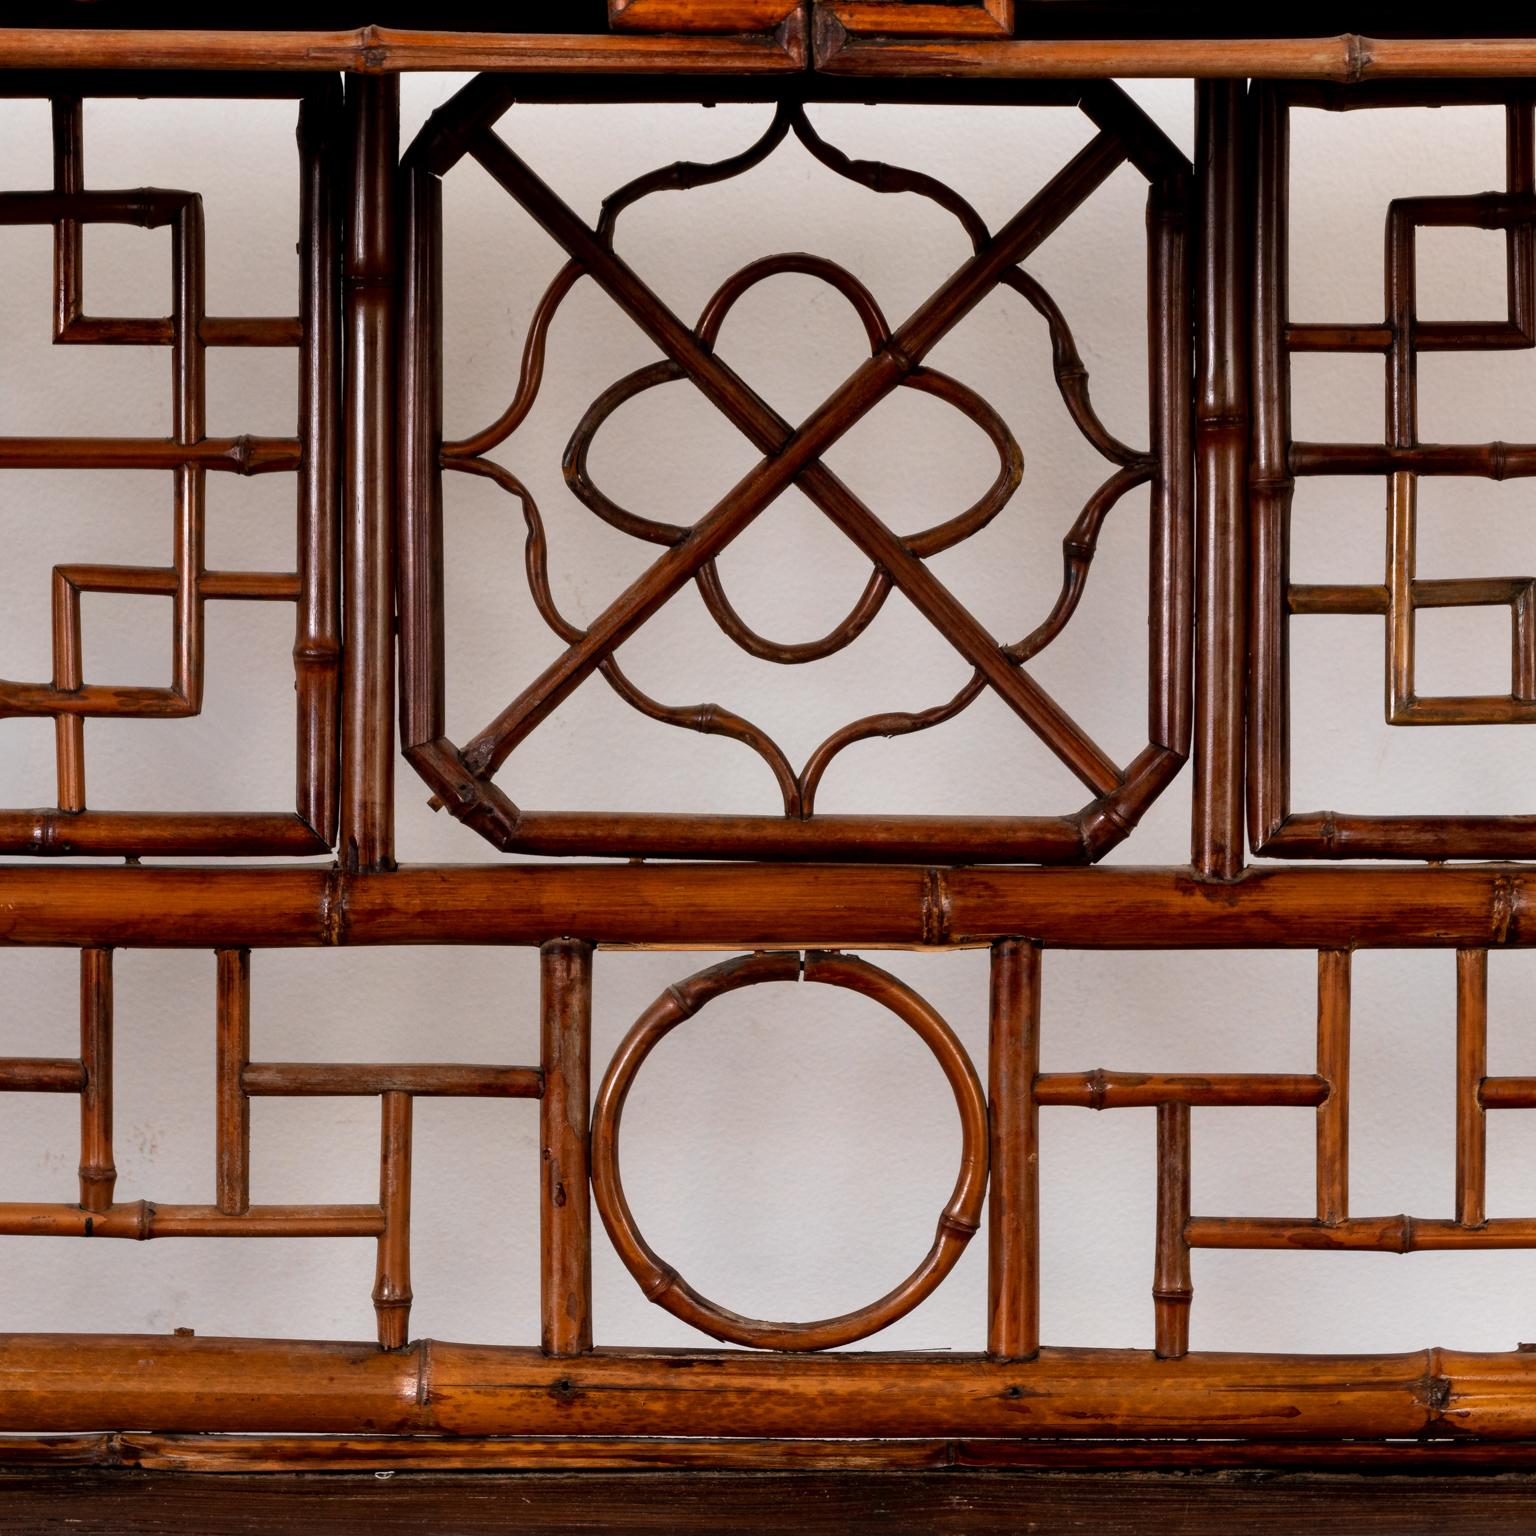 Circa 1960s Chinese bamboo etagere decorated with various geometric fretwork panels on the back and sides. Made in China. Please note of wear consistent with age including minor finish loss.